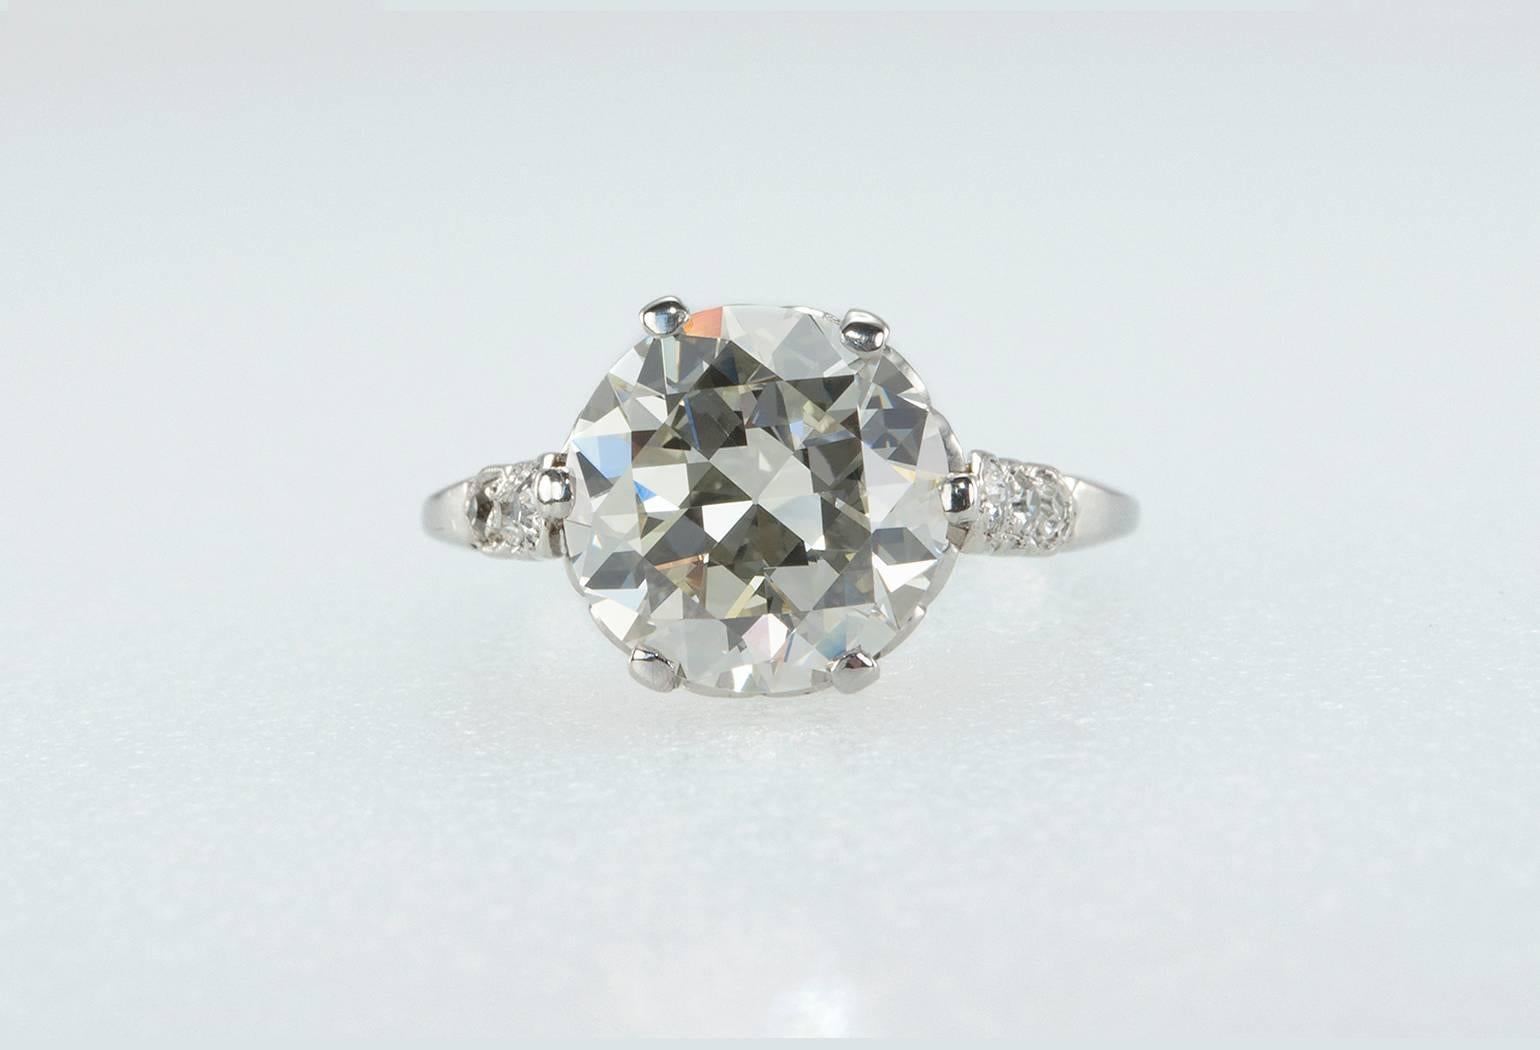 This stunning ring features a 3.36 carat Old European Cut diamond center that is L in color and VS1 in clarity (per EGL certificate).  Both sides of the ring have 3 full old cut diamonds for total diamond weight of approximately 0.16 carats.  Circa